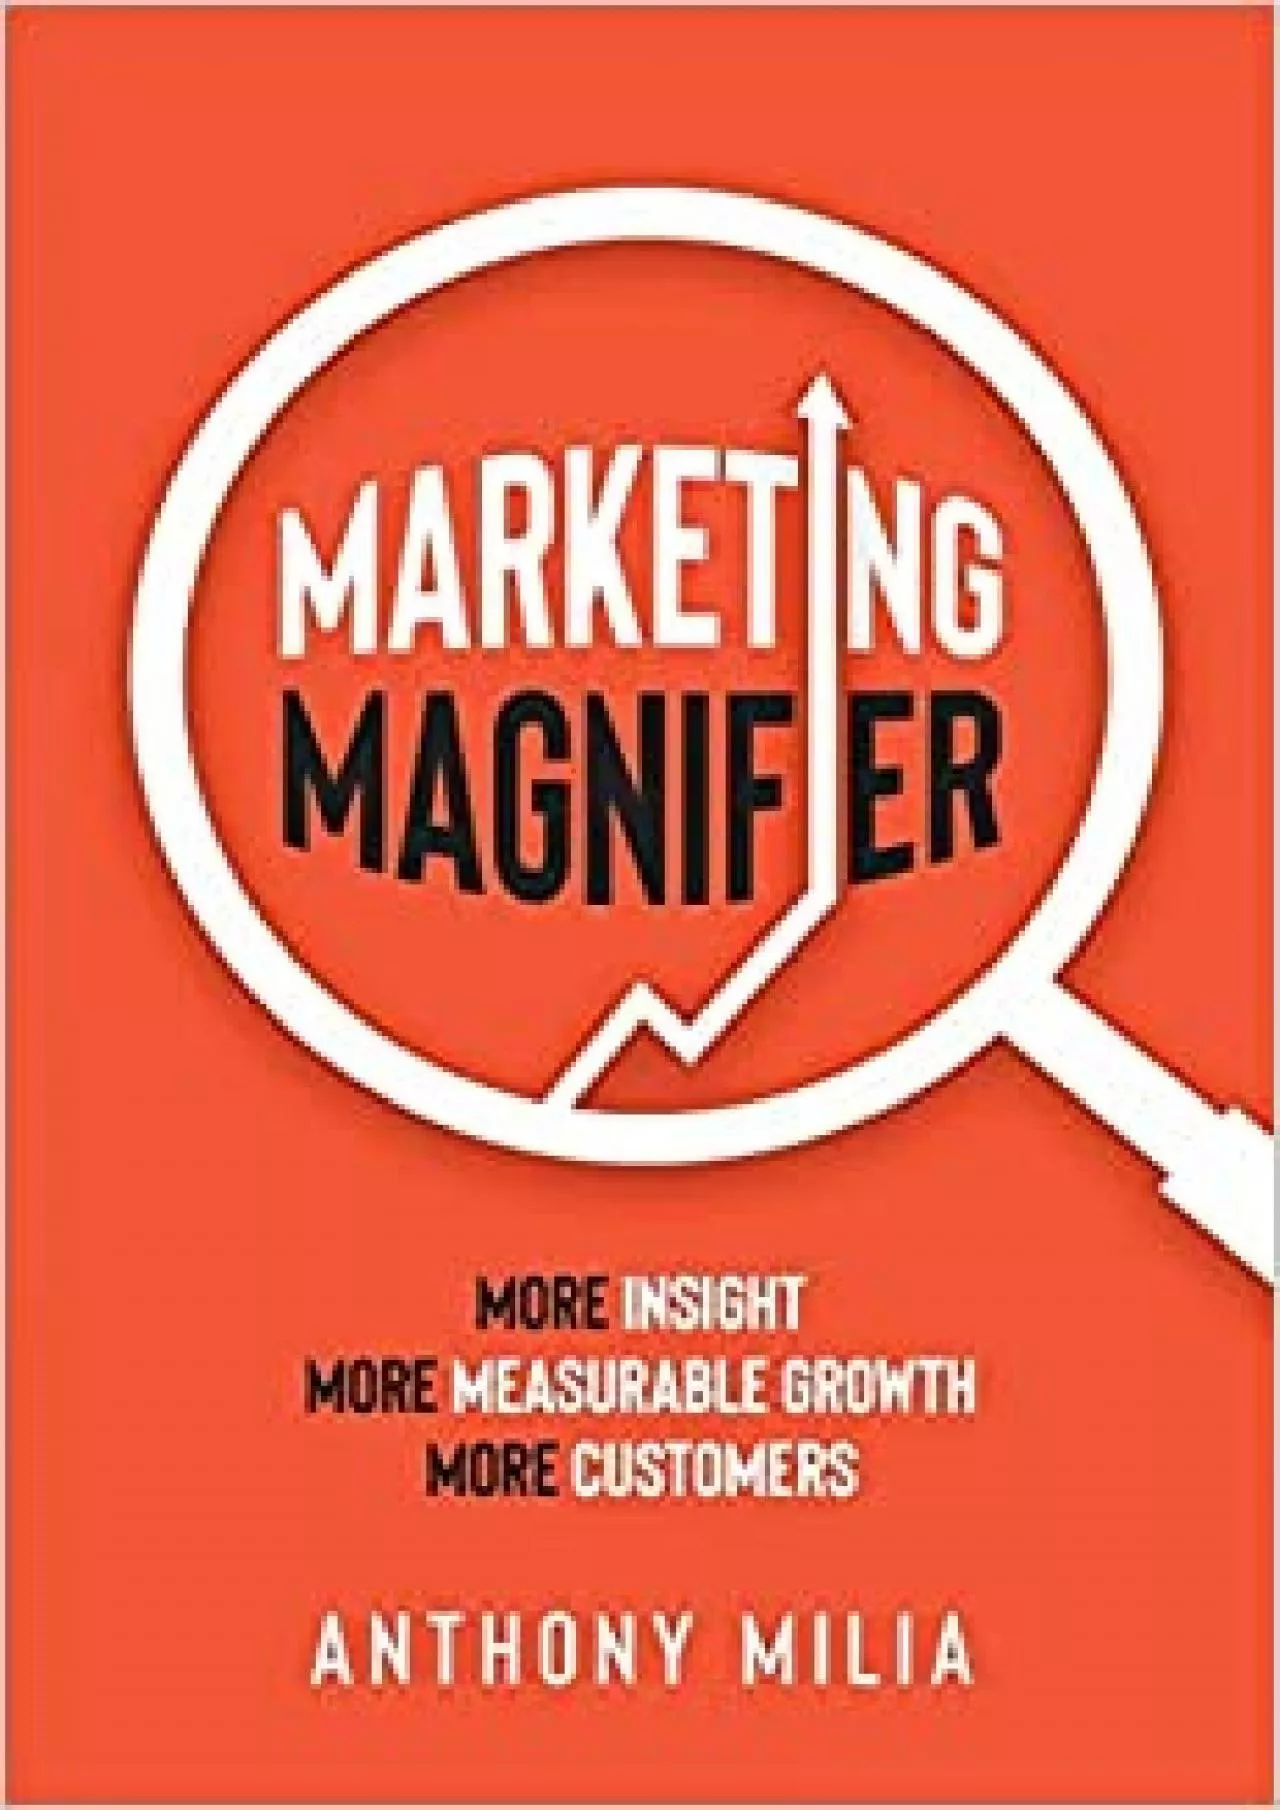 Marketing Magnifier More Insight More Measurable Growth More Customers